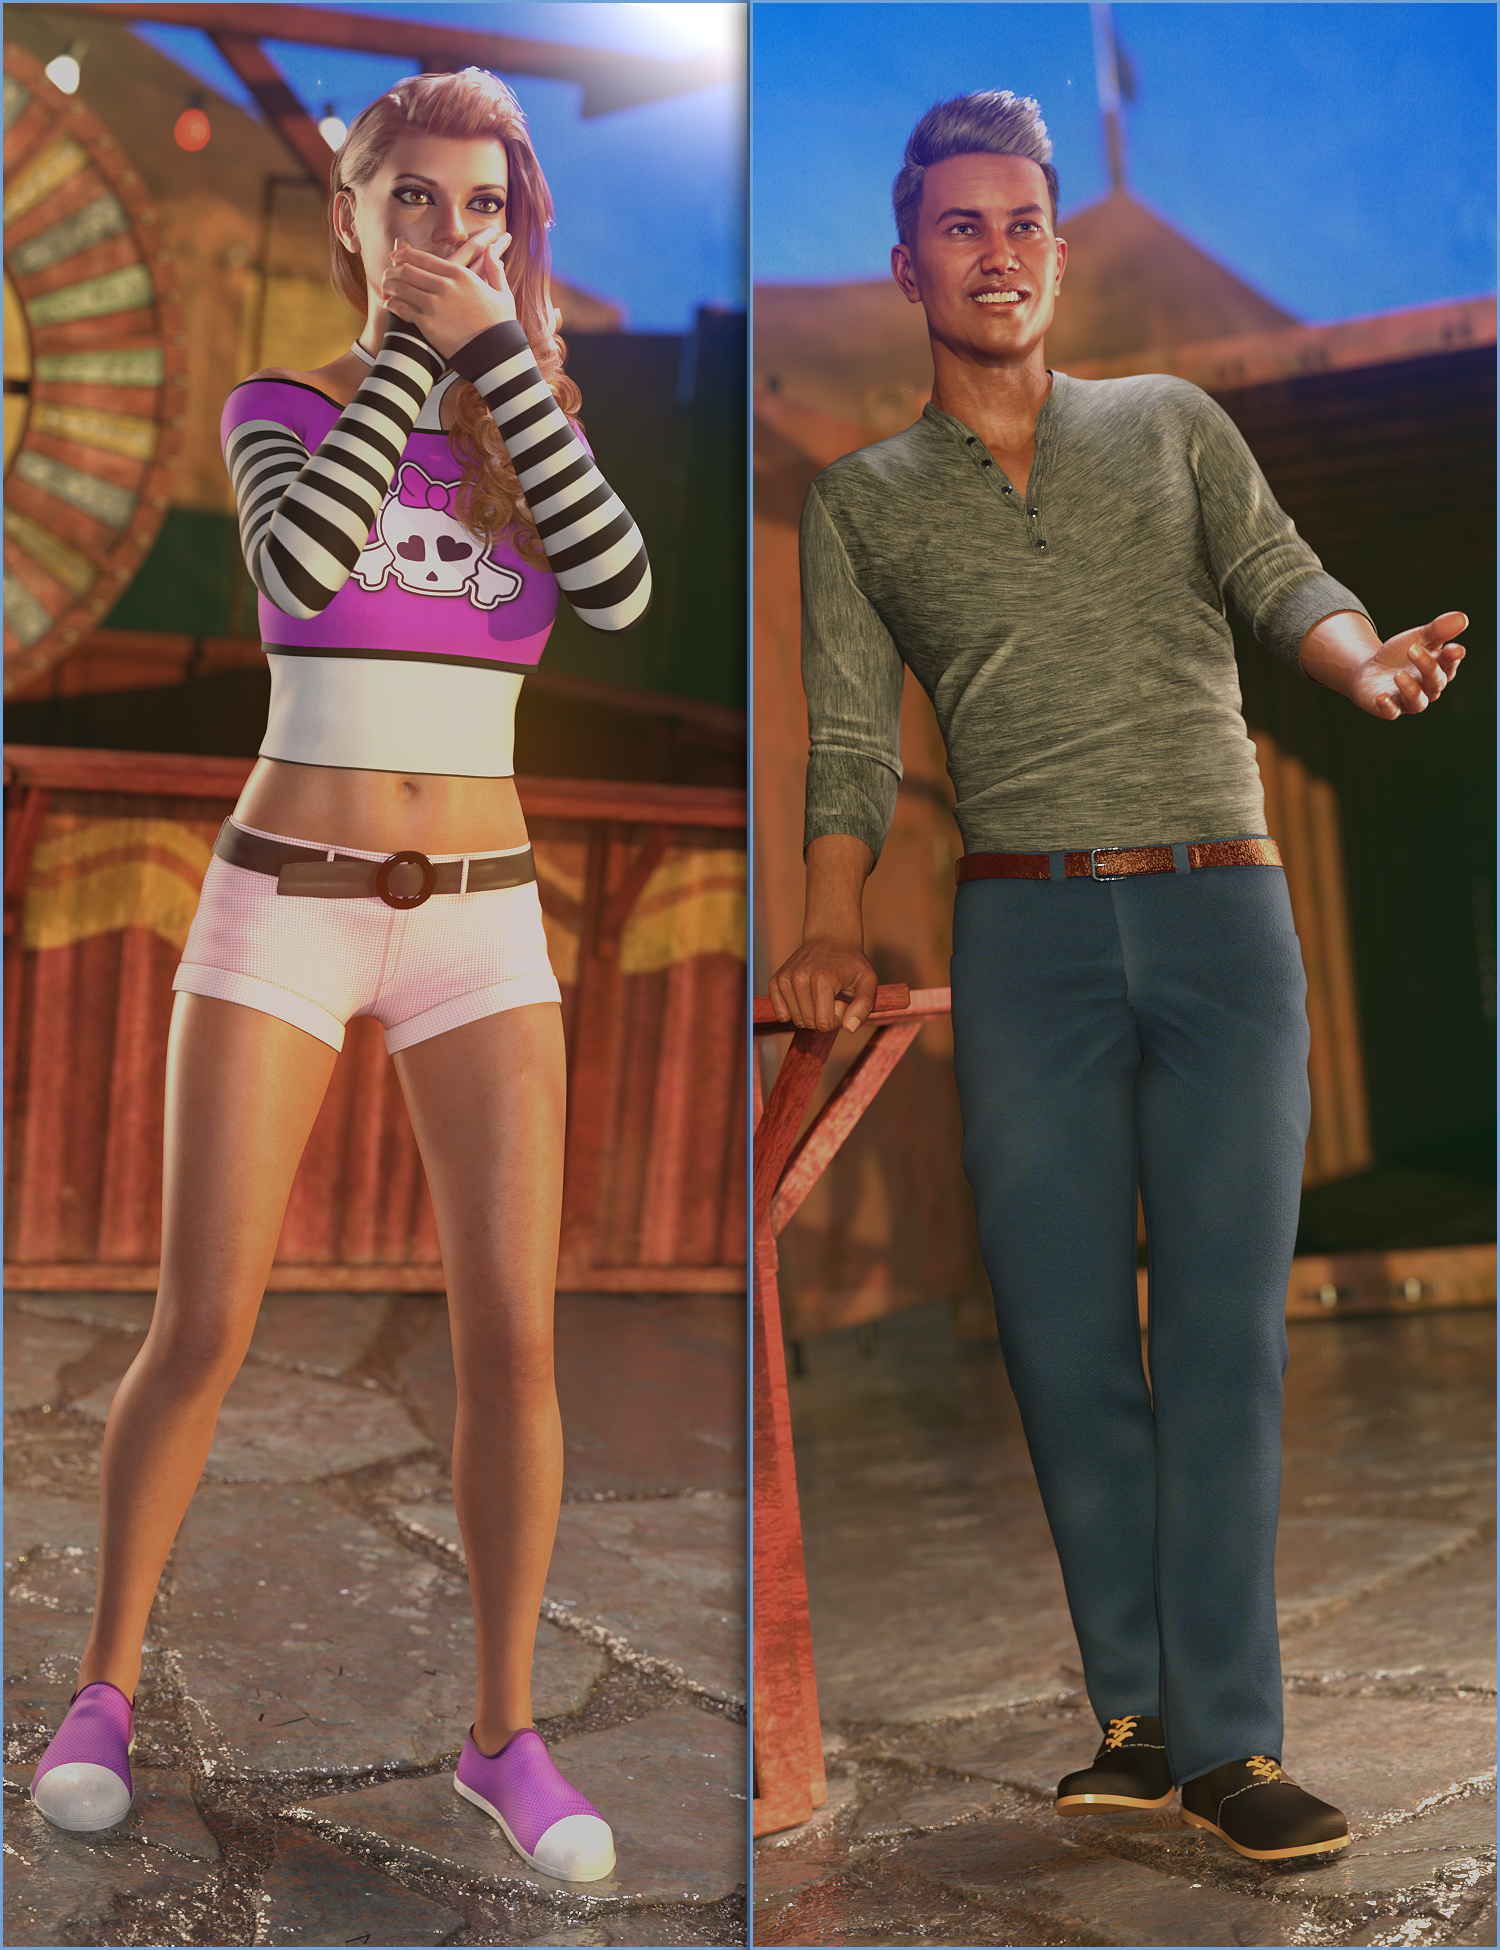 Midway Games Poses by: Blackbeard MediaGustef, 3D Models by Daz 3D